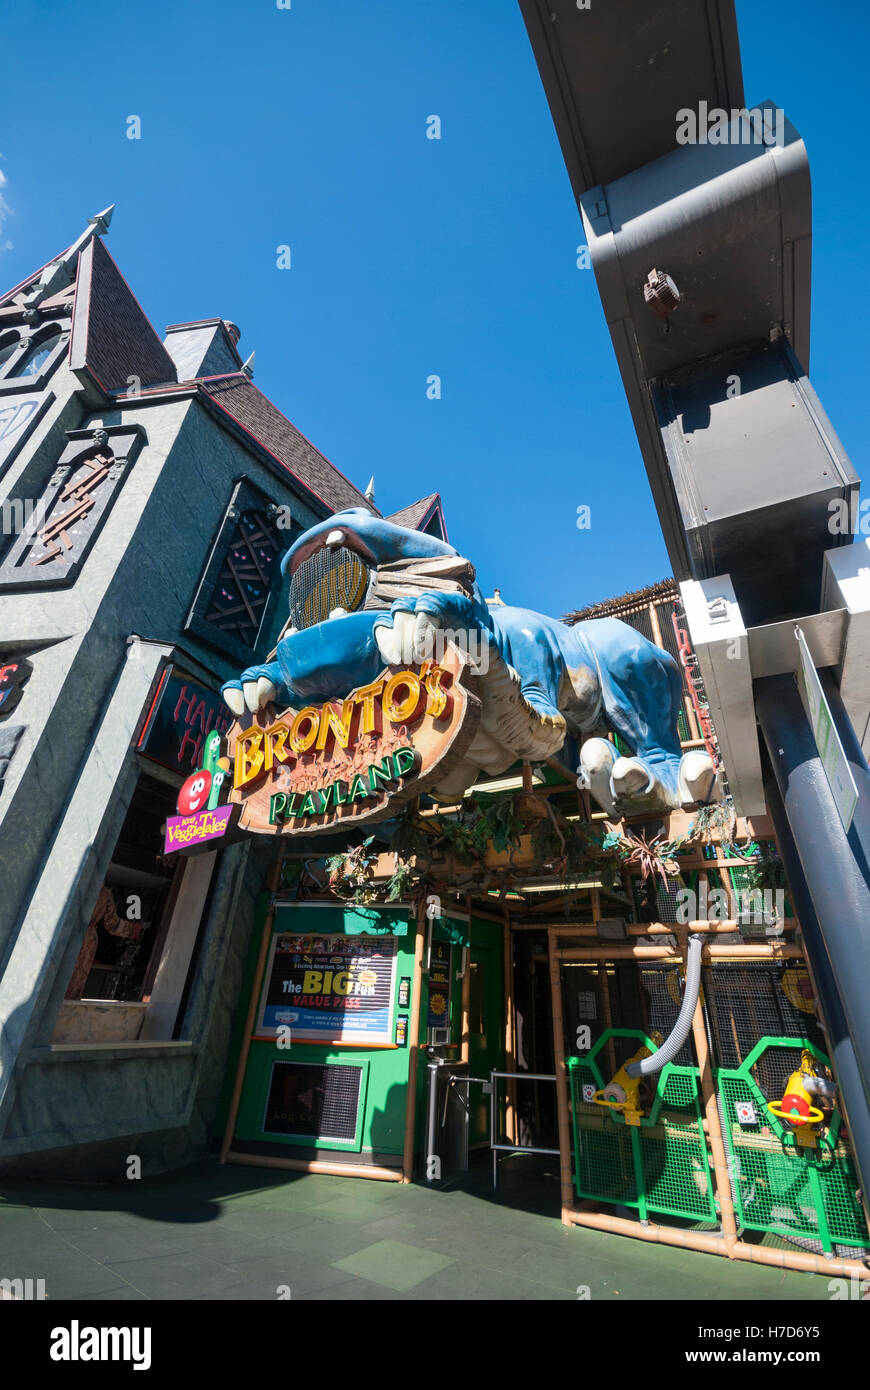 Brontos Adventure Playland a childrens attraction on Clifton hill, a street lined with tourist attractions -Niagara Falls Canada Stock Photo